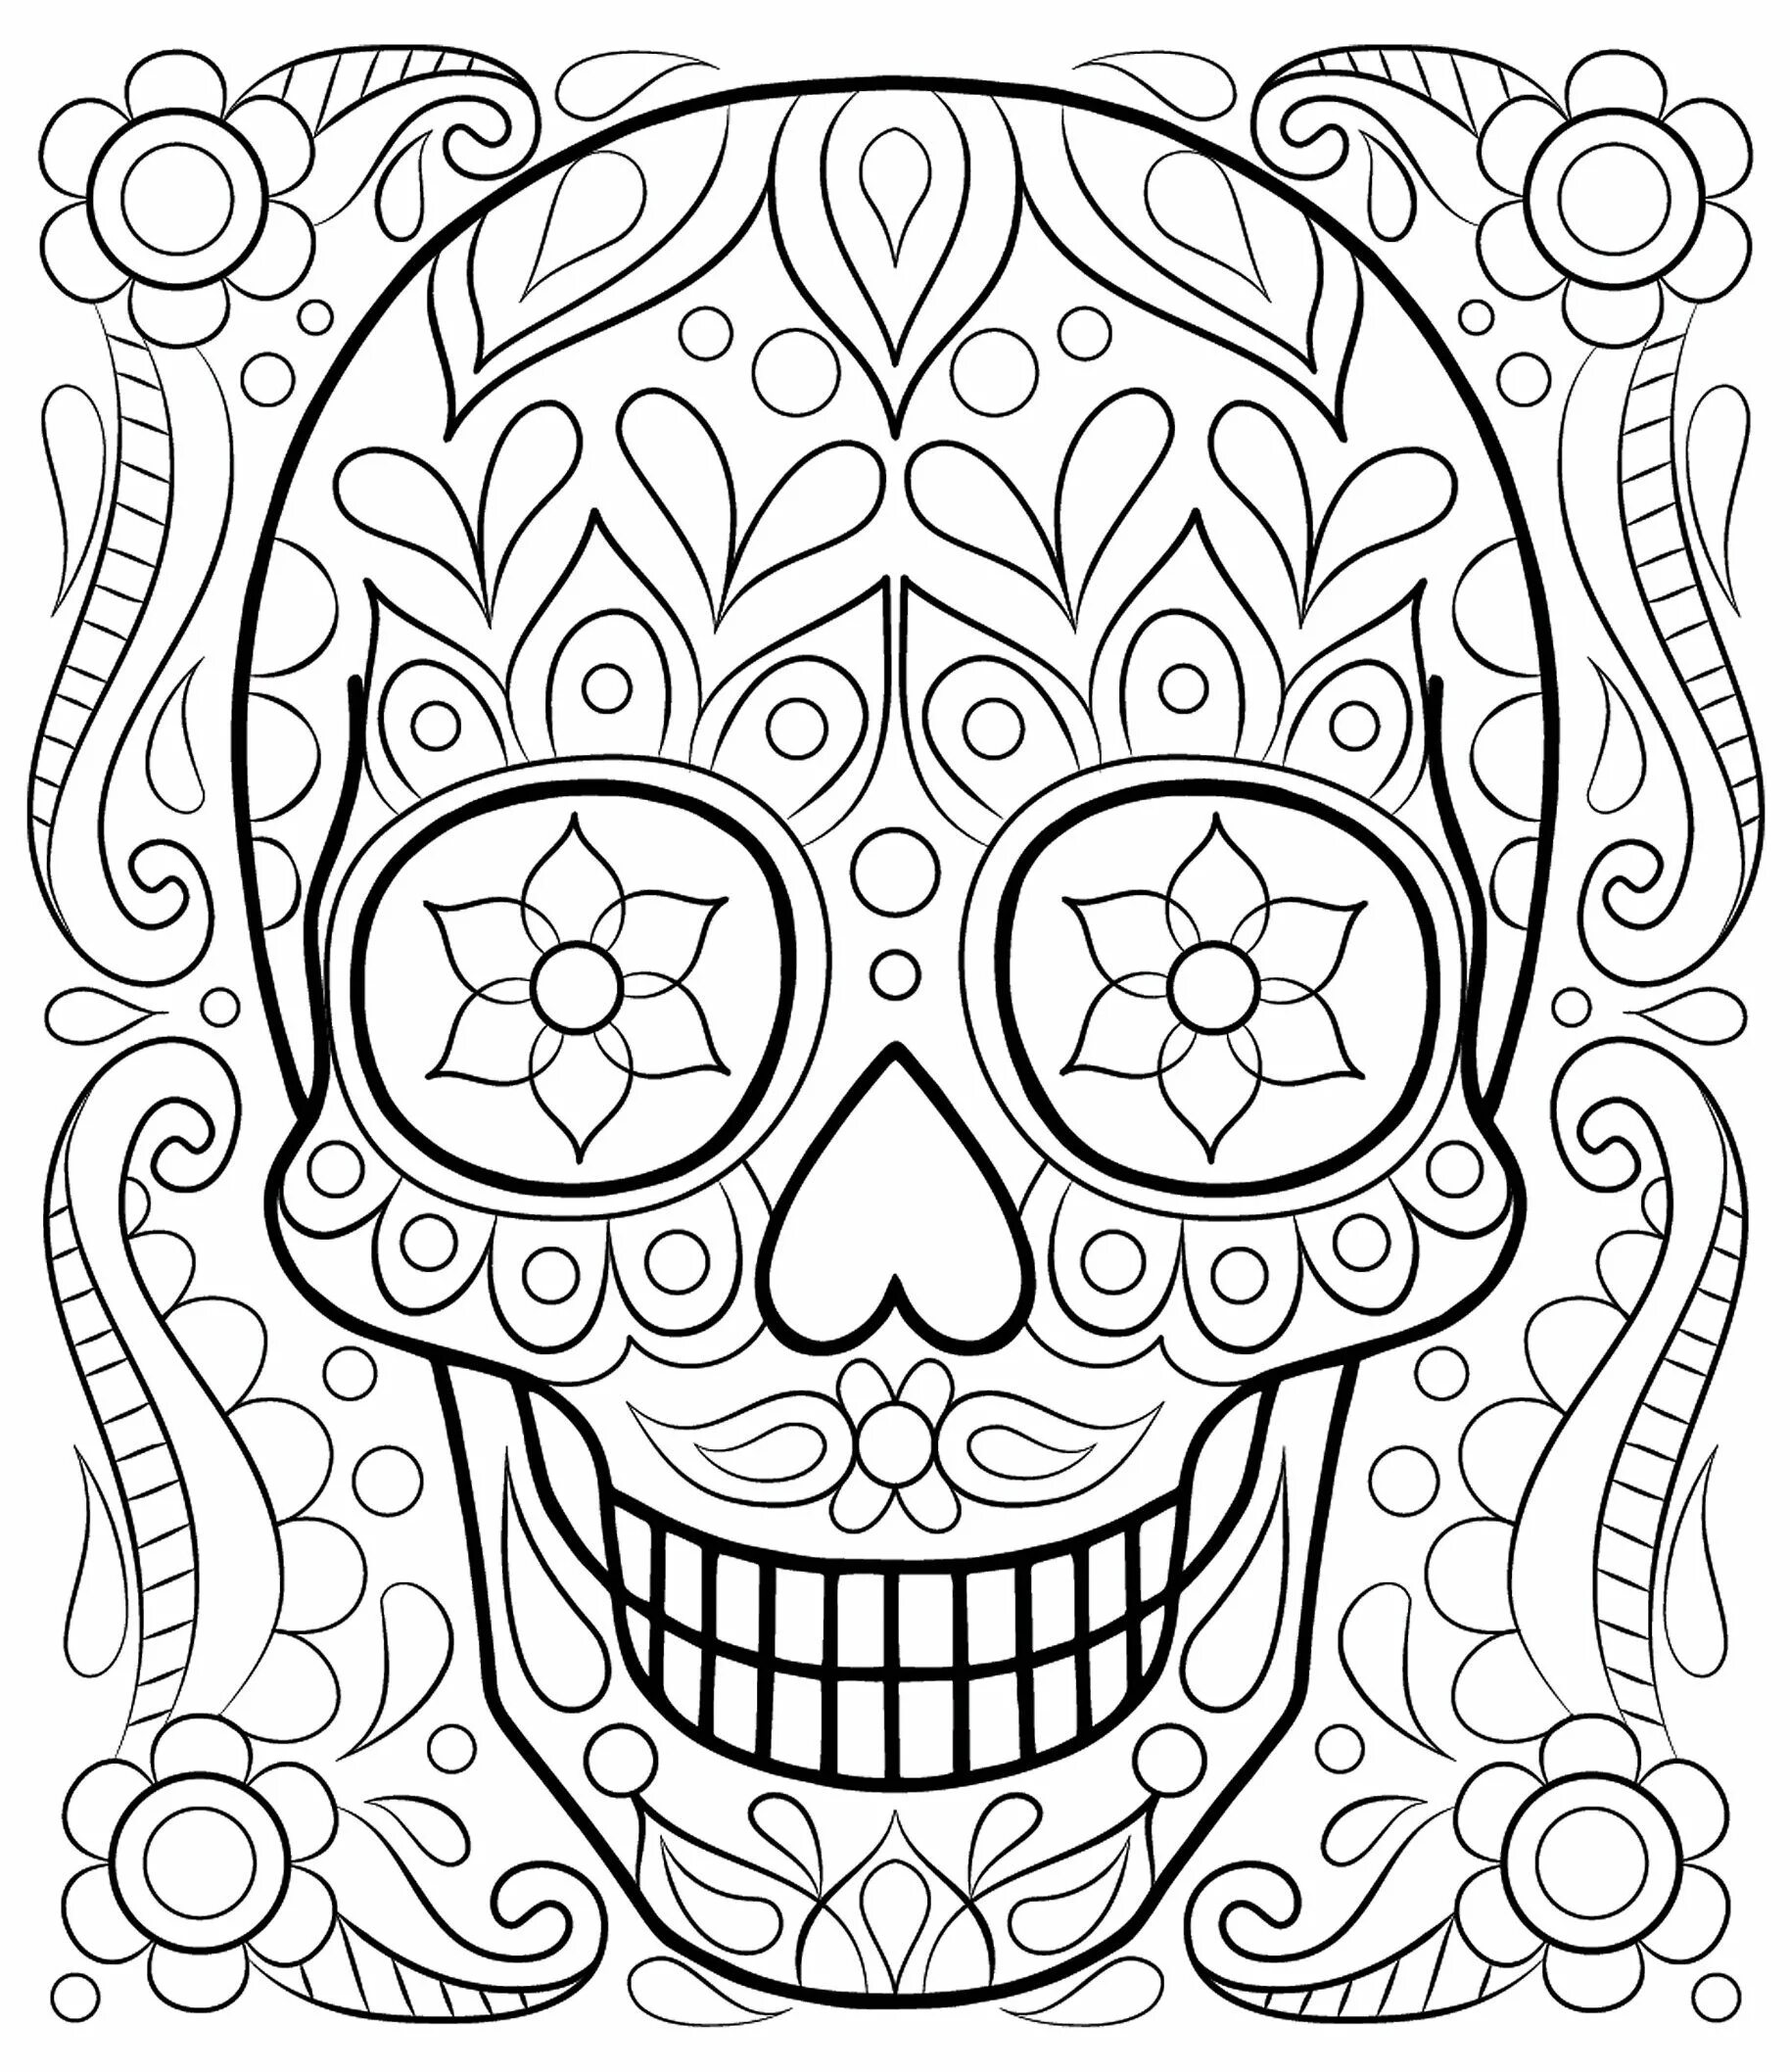 Playful adult coloring book